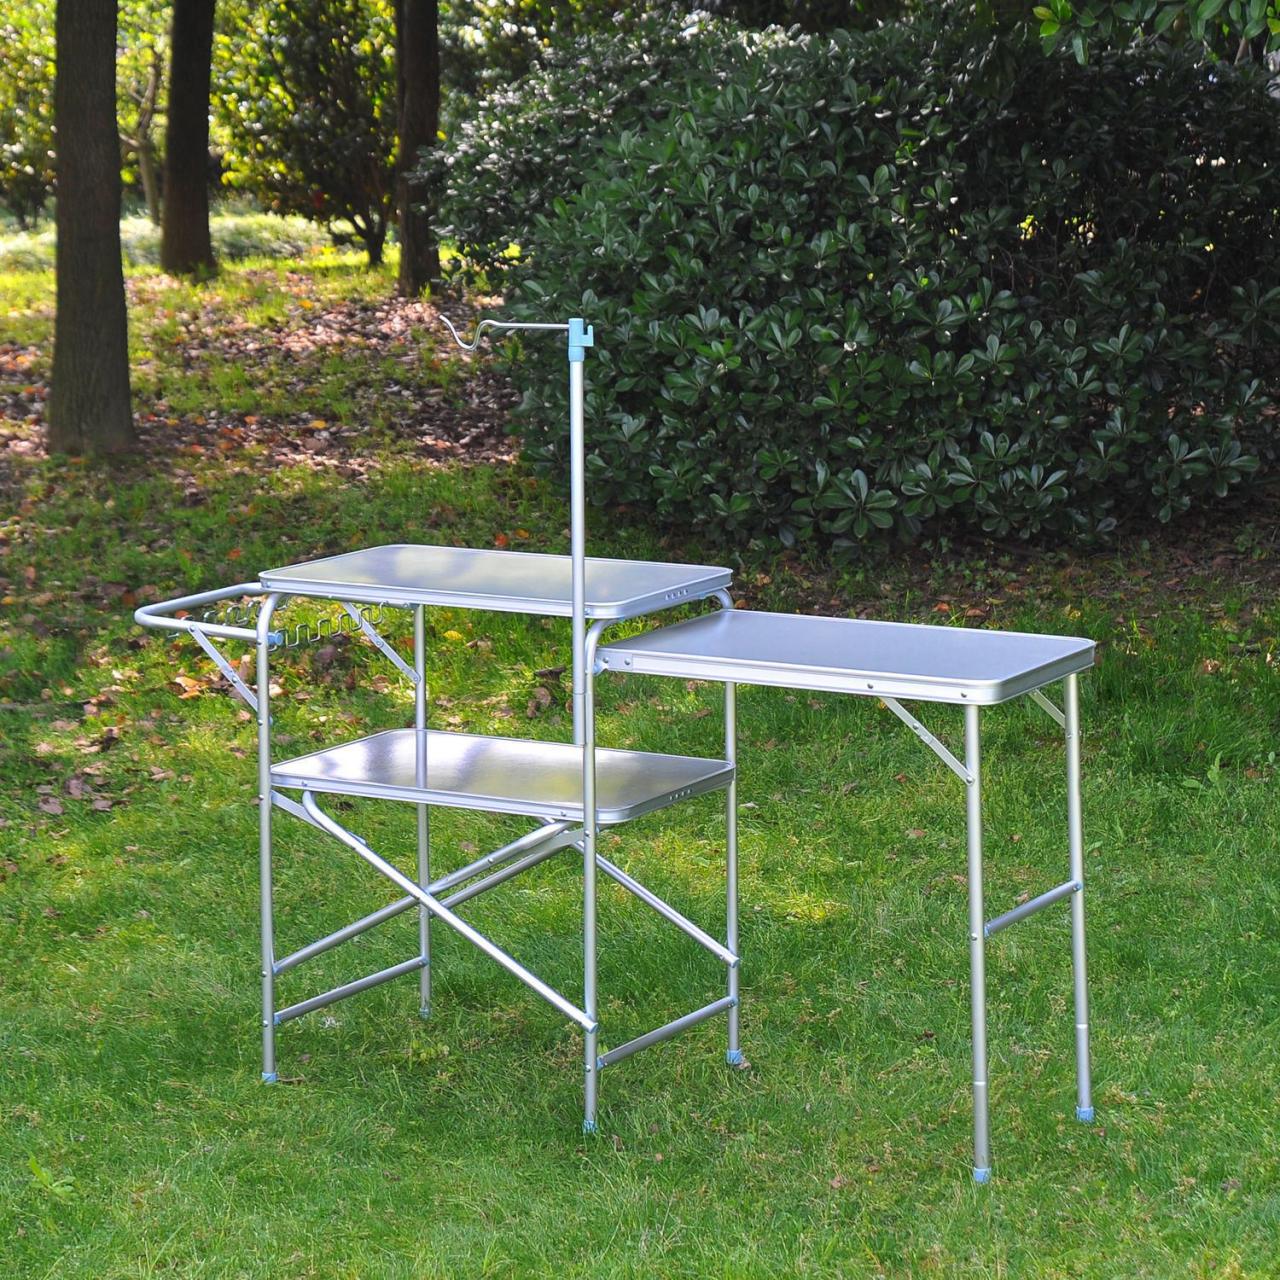 Outsunny 6' Portable Fold-Up Camp Table | Walmart Canada